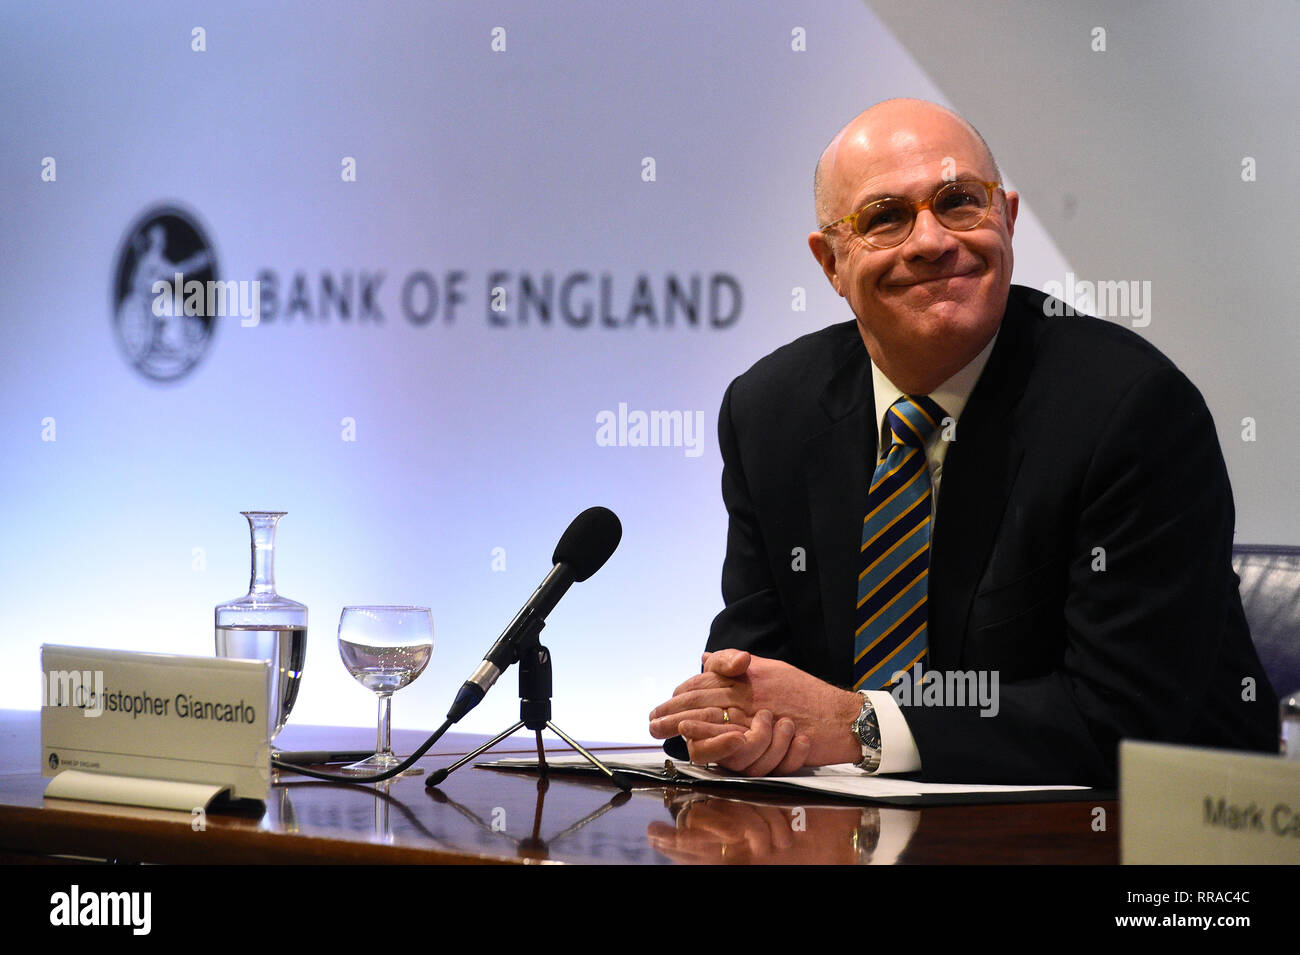 J. Christopher Giancarlo, Acting Chairman, Commodity Futures Trading Commission during a press conference at the Bank of England in London. Stock Photo